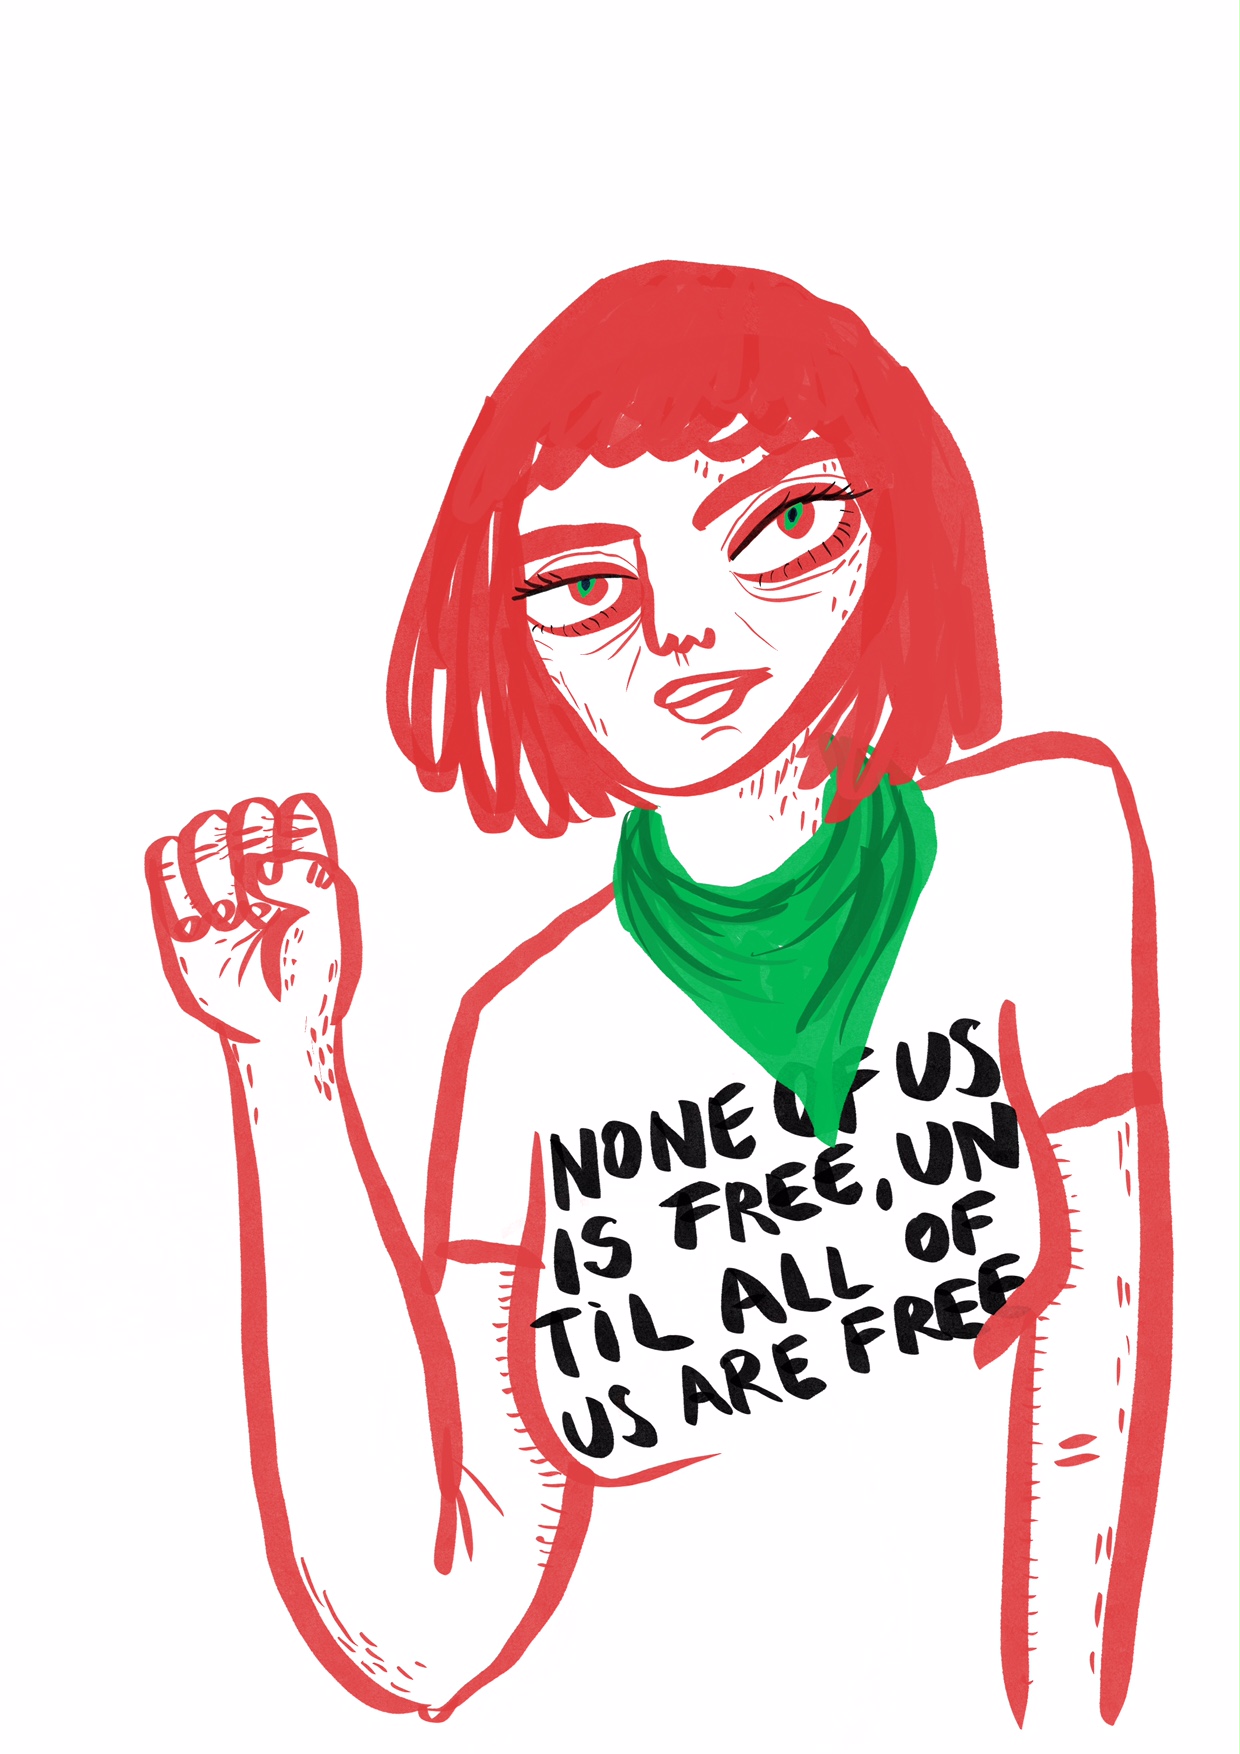 Woman raising fist, wearing a green kerchief and shirt reading "None of us is free until all of us are free"